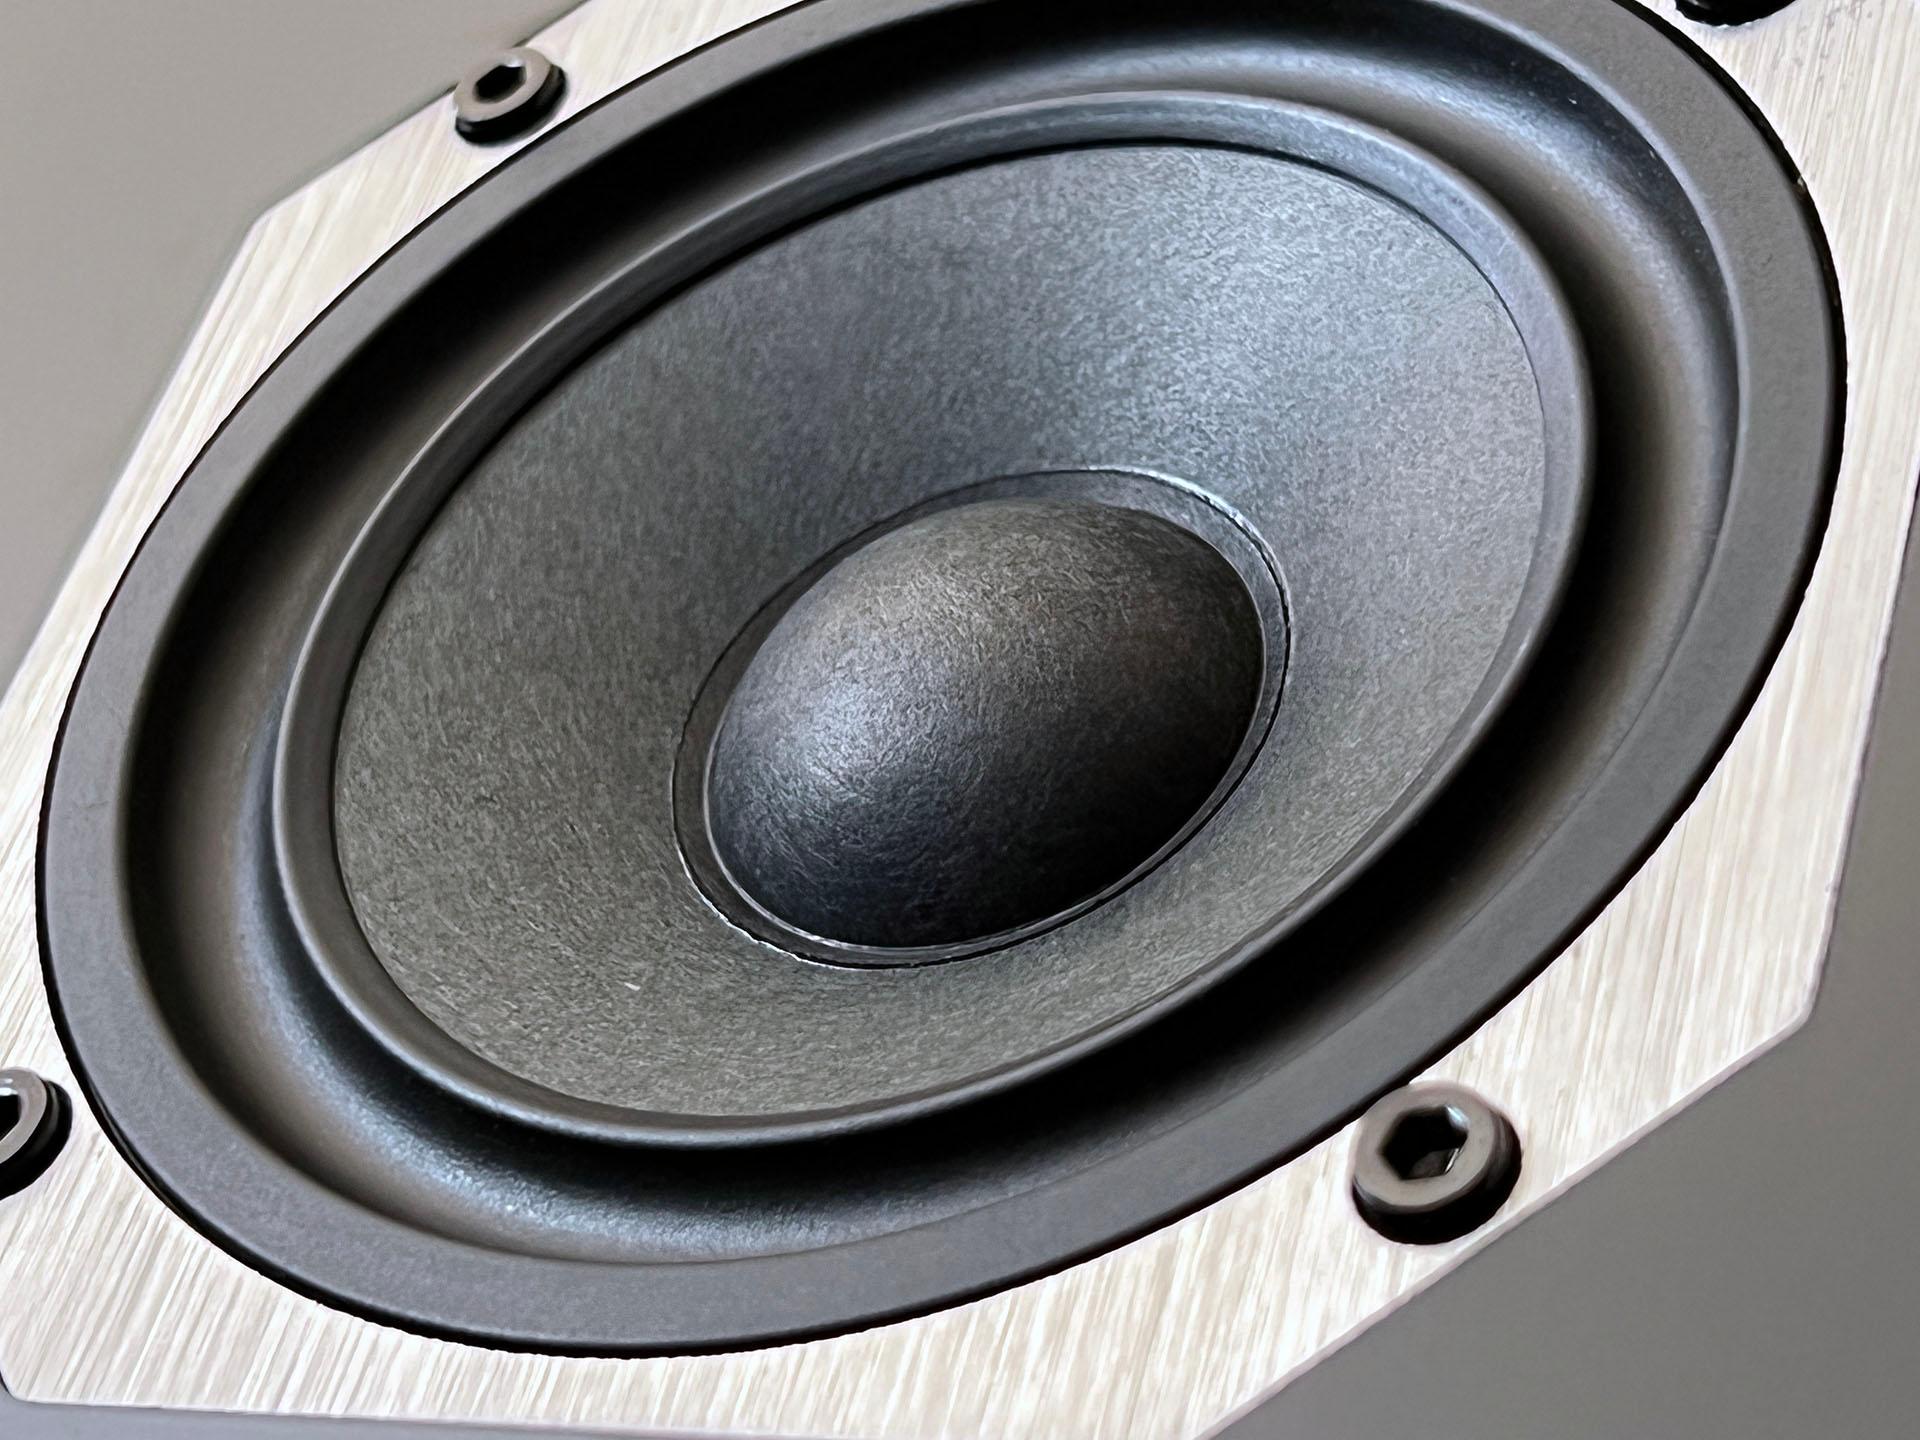 When old school meets new, the result is a speaker that takes care of business. 85c68f7d klh midrange driver